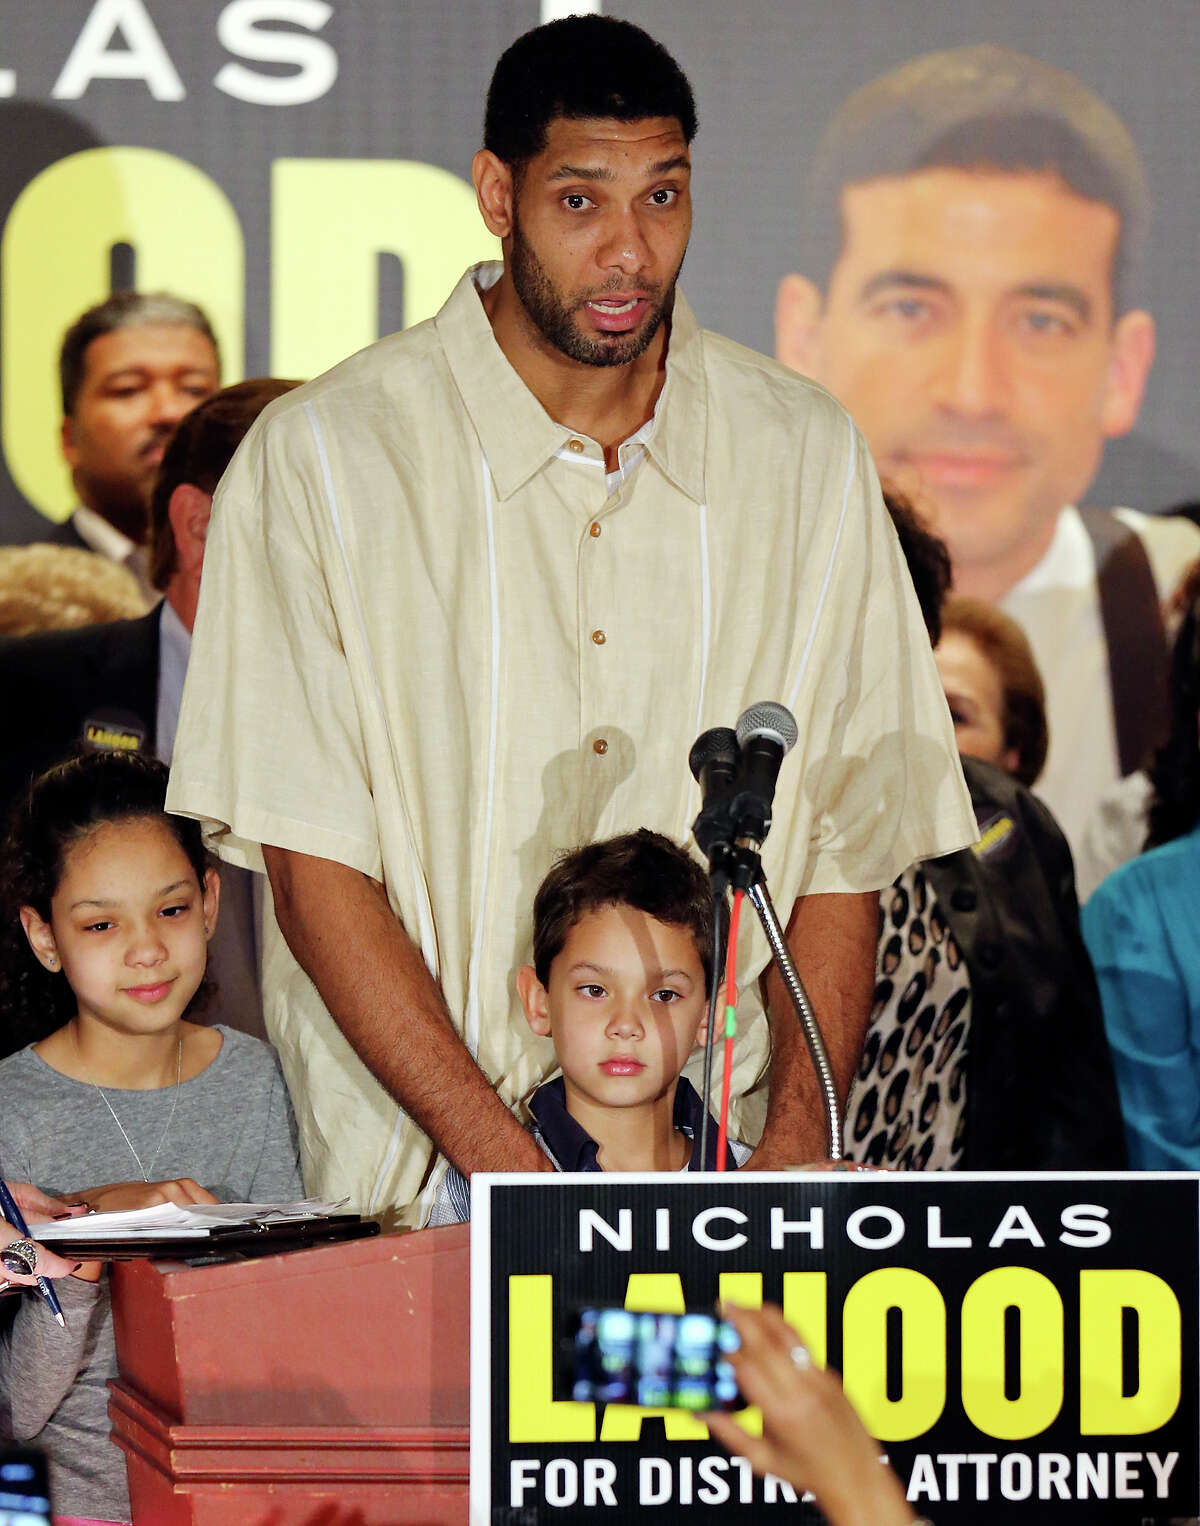 Spurs' Tim Duncan, with his children Sydney (left) and Draven, speaks during Nicholas LaHood's kickoff campaign event for district attorney Saturday Jan. 18, 2014 at the St. Paul Community Center.